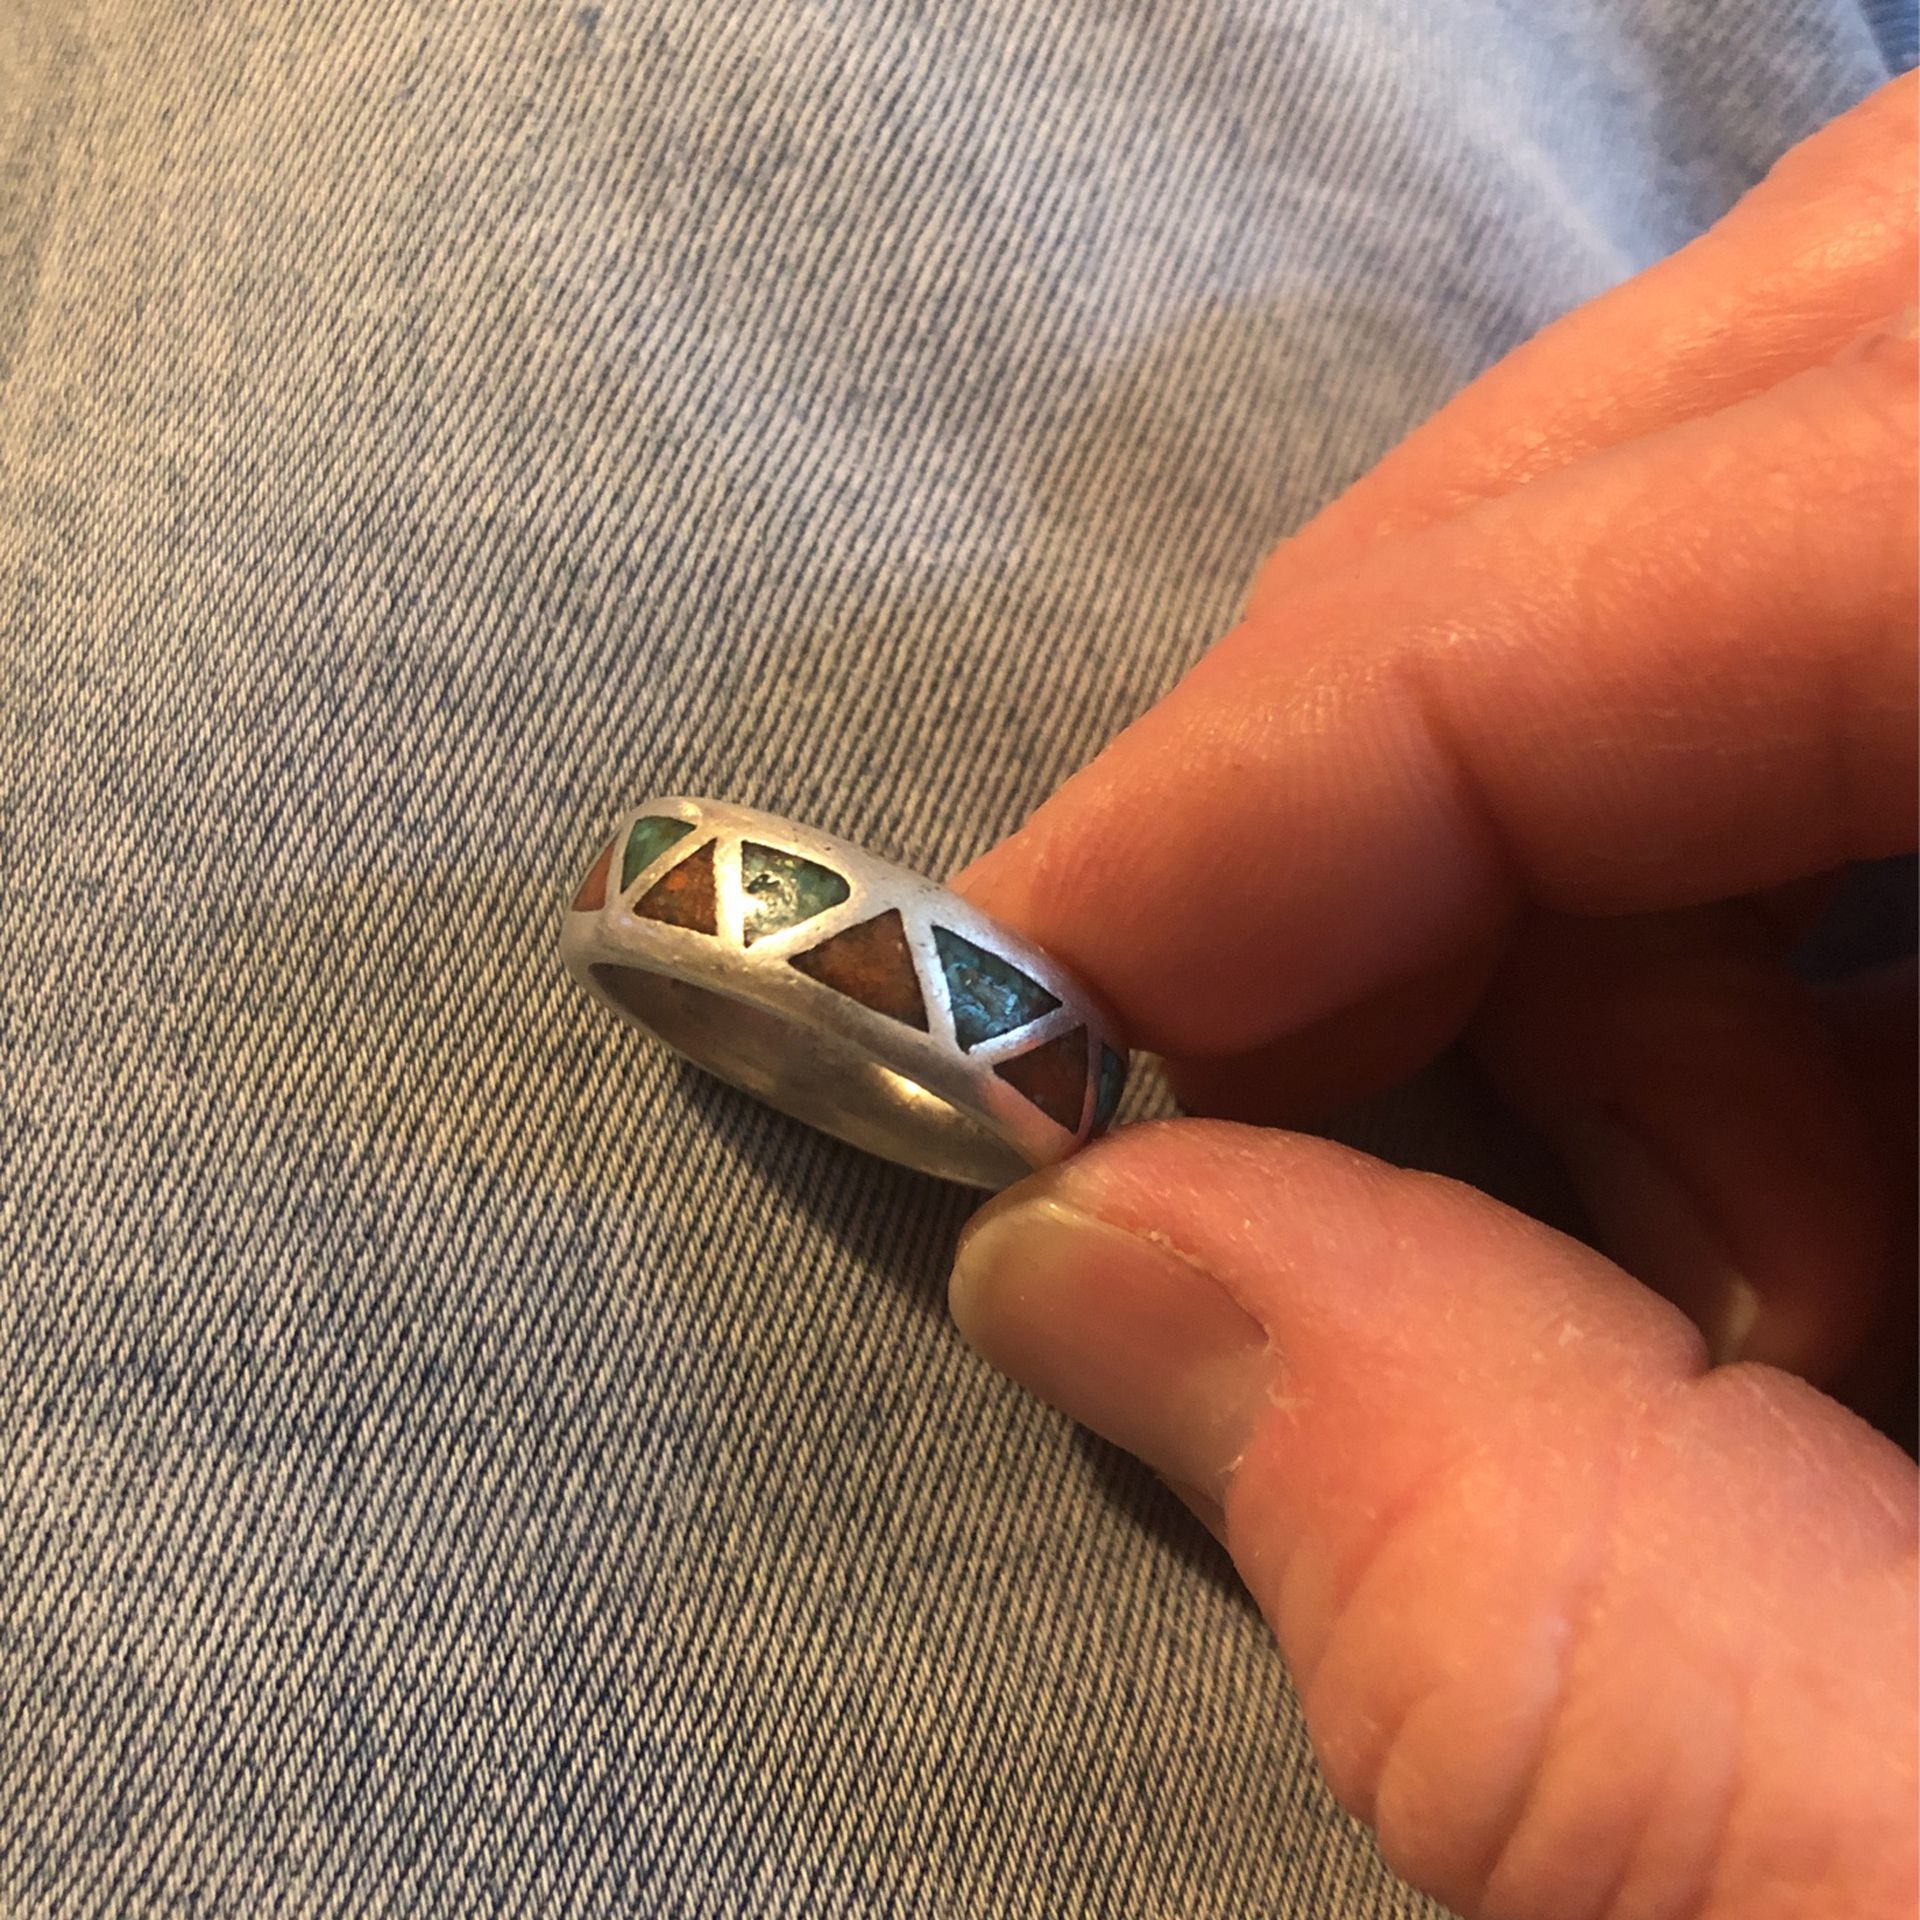 Navaho Silver/terquoise Ring